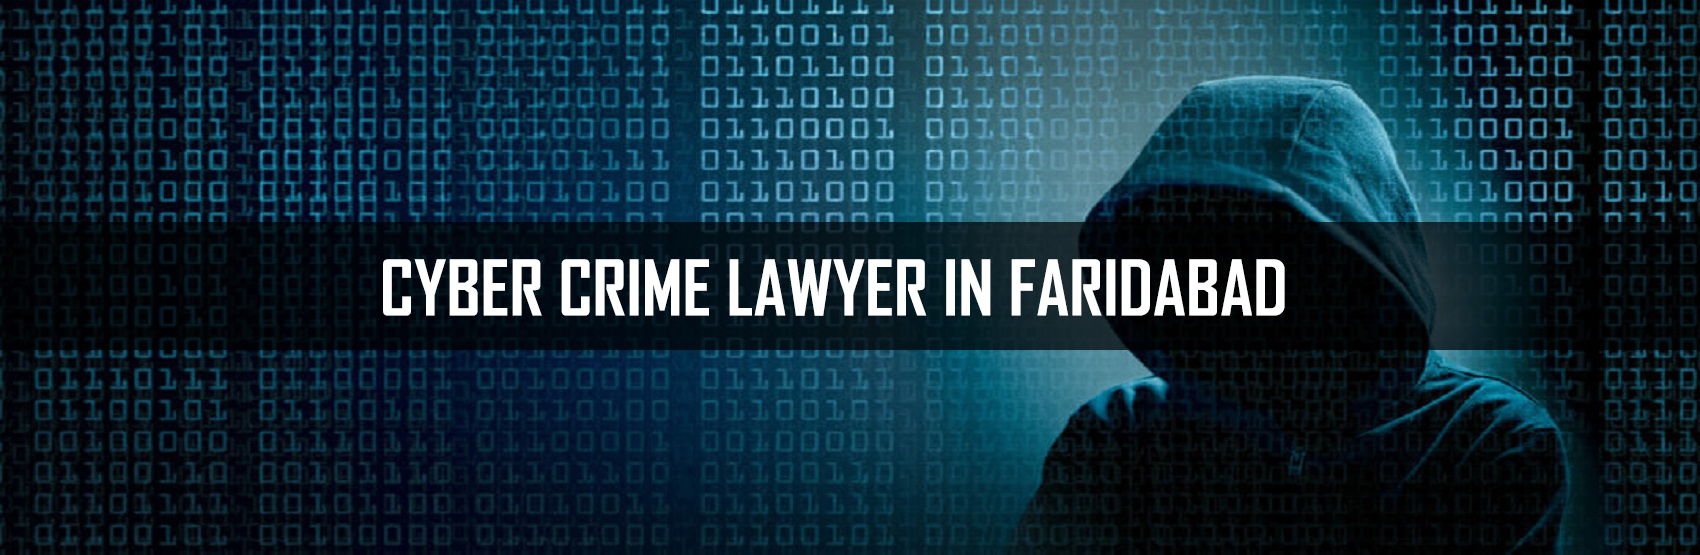 Cyber Crime Lawyer in Faridabad